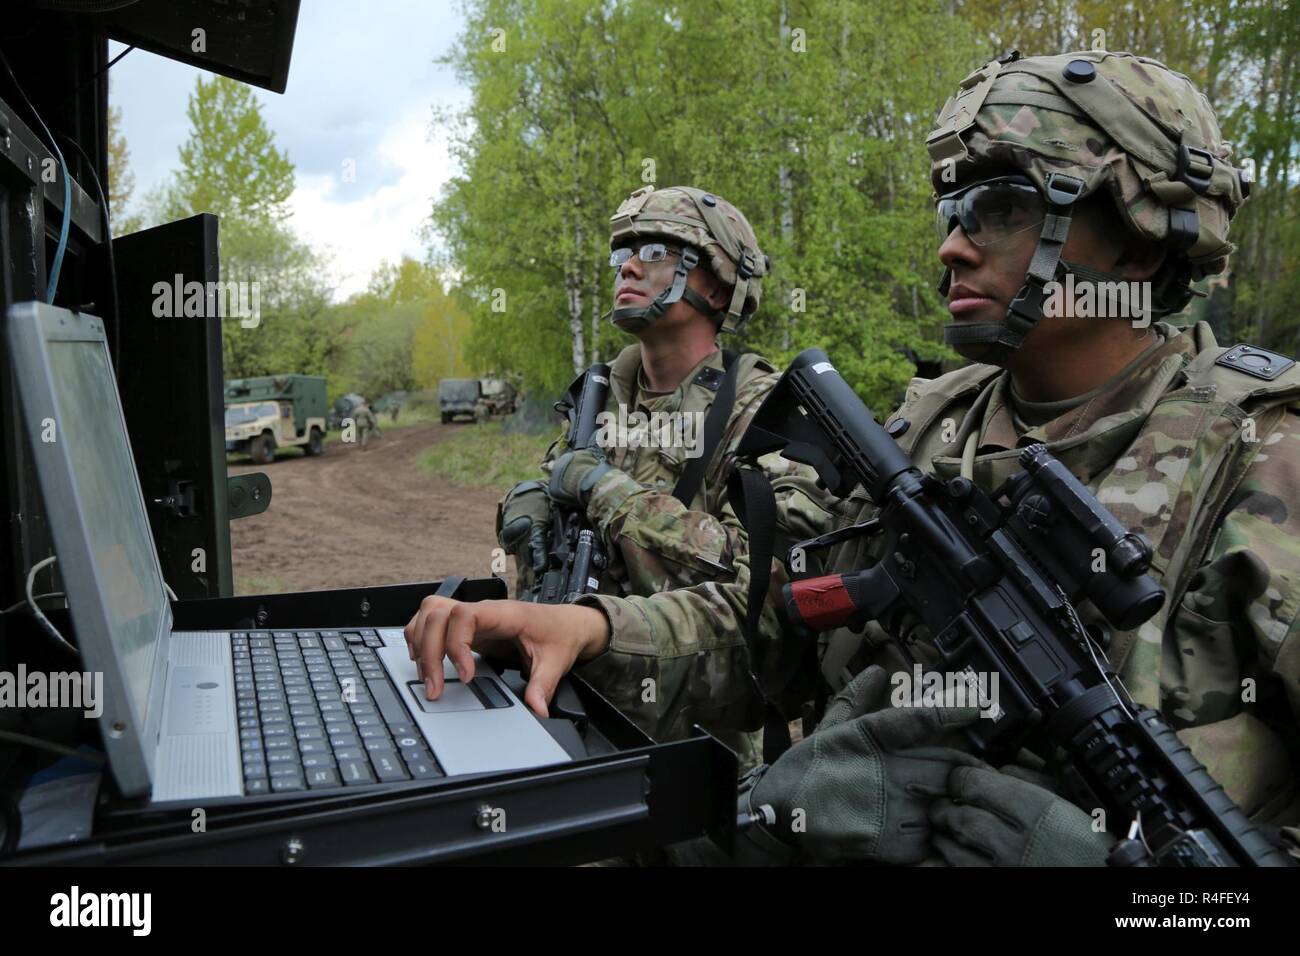 U.S. Army Sgt. Dulan Haher, left, and Sgt. Michael Ventura of Delta Company, Regimental Engineer Squadron, 2d Cavalry Regiment align a radar system while establishing a tactical operations center during Saber Junction 17 at the Hohenfels Training Area, Germany, May 4, 2017. Saber Junction 17 is the U.S. Army Europe’s 2d Cavalry Regiment’s combat training center certification exercise, taking place at the Joint Multinational Readiness Center in Hohenfels, Germany, Apr. 25-May 19, 2017. The exercise is designed to assess the readiness of the regiment to conduct unified land operations, with a pa Stock Photo